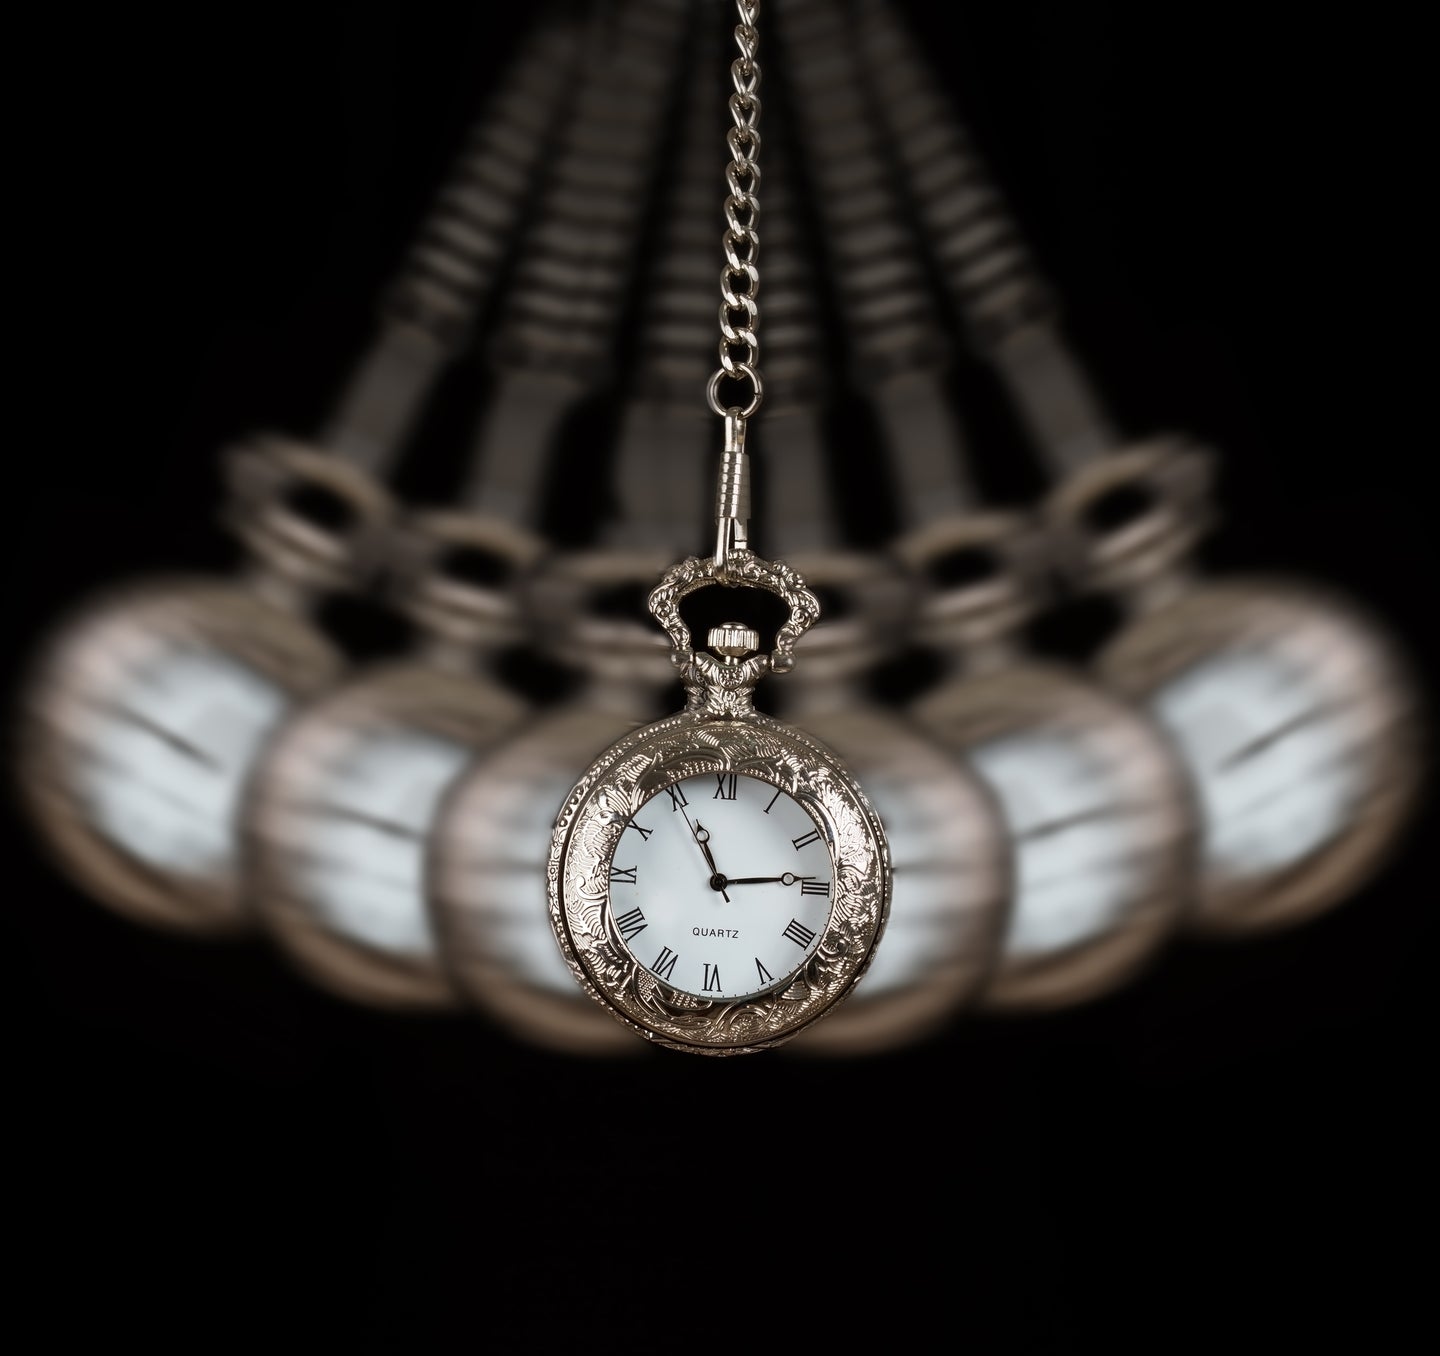 Silver pocket watch being swung on a chain on a black background to symbolize a time crystal